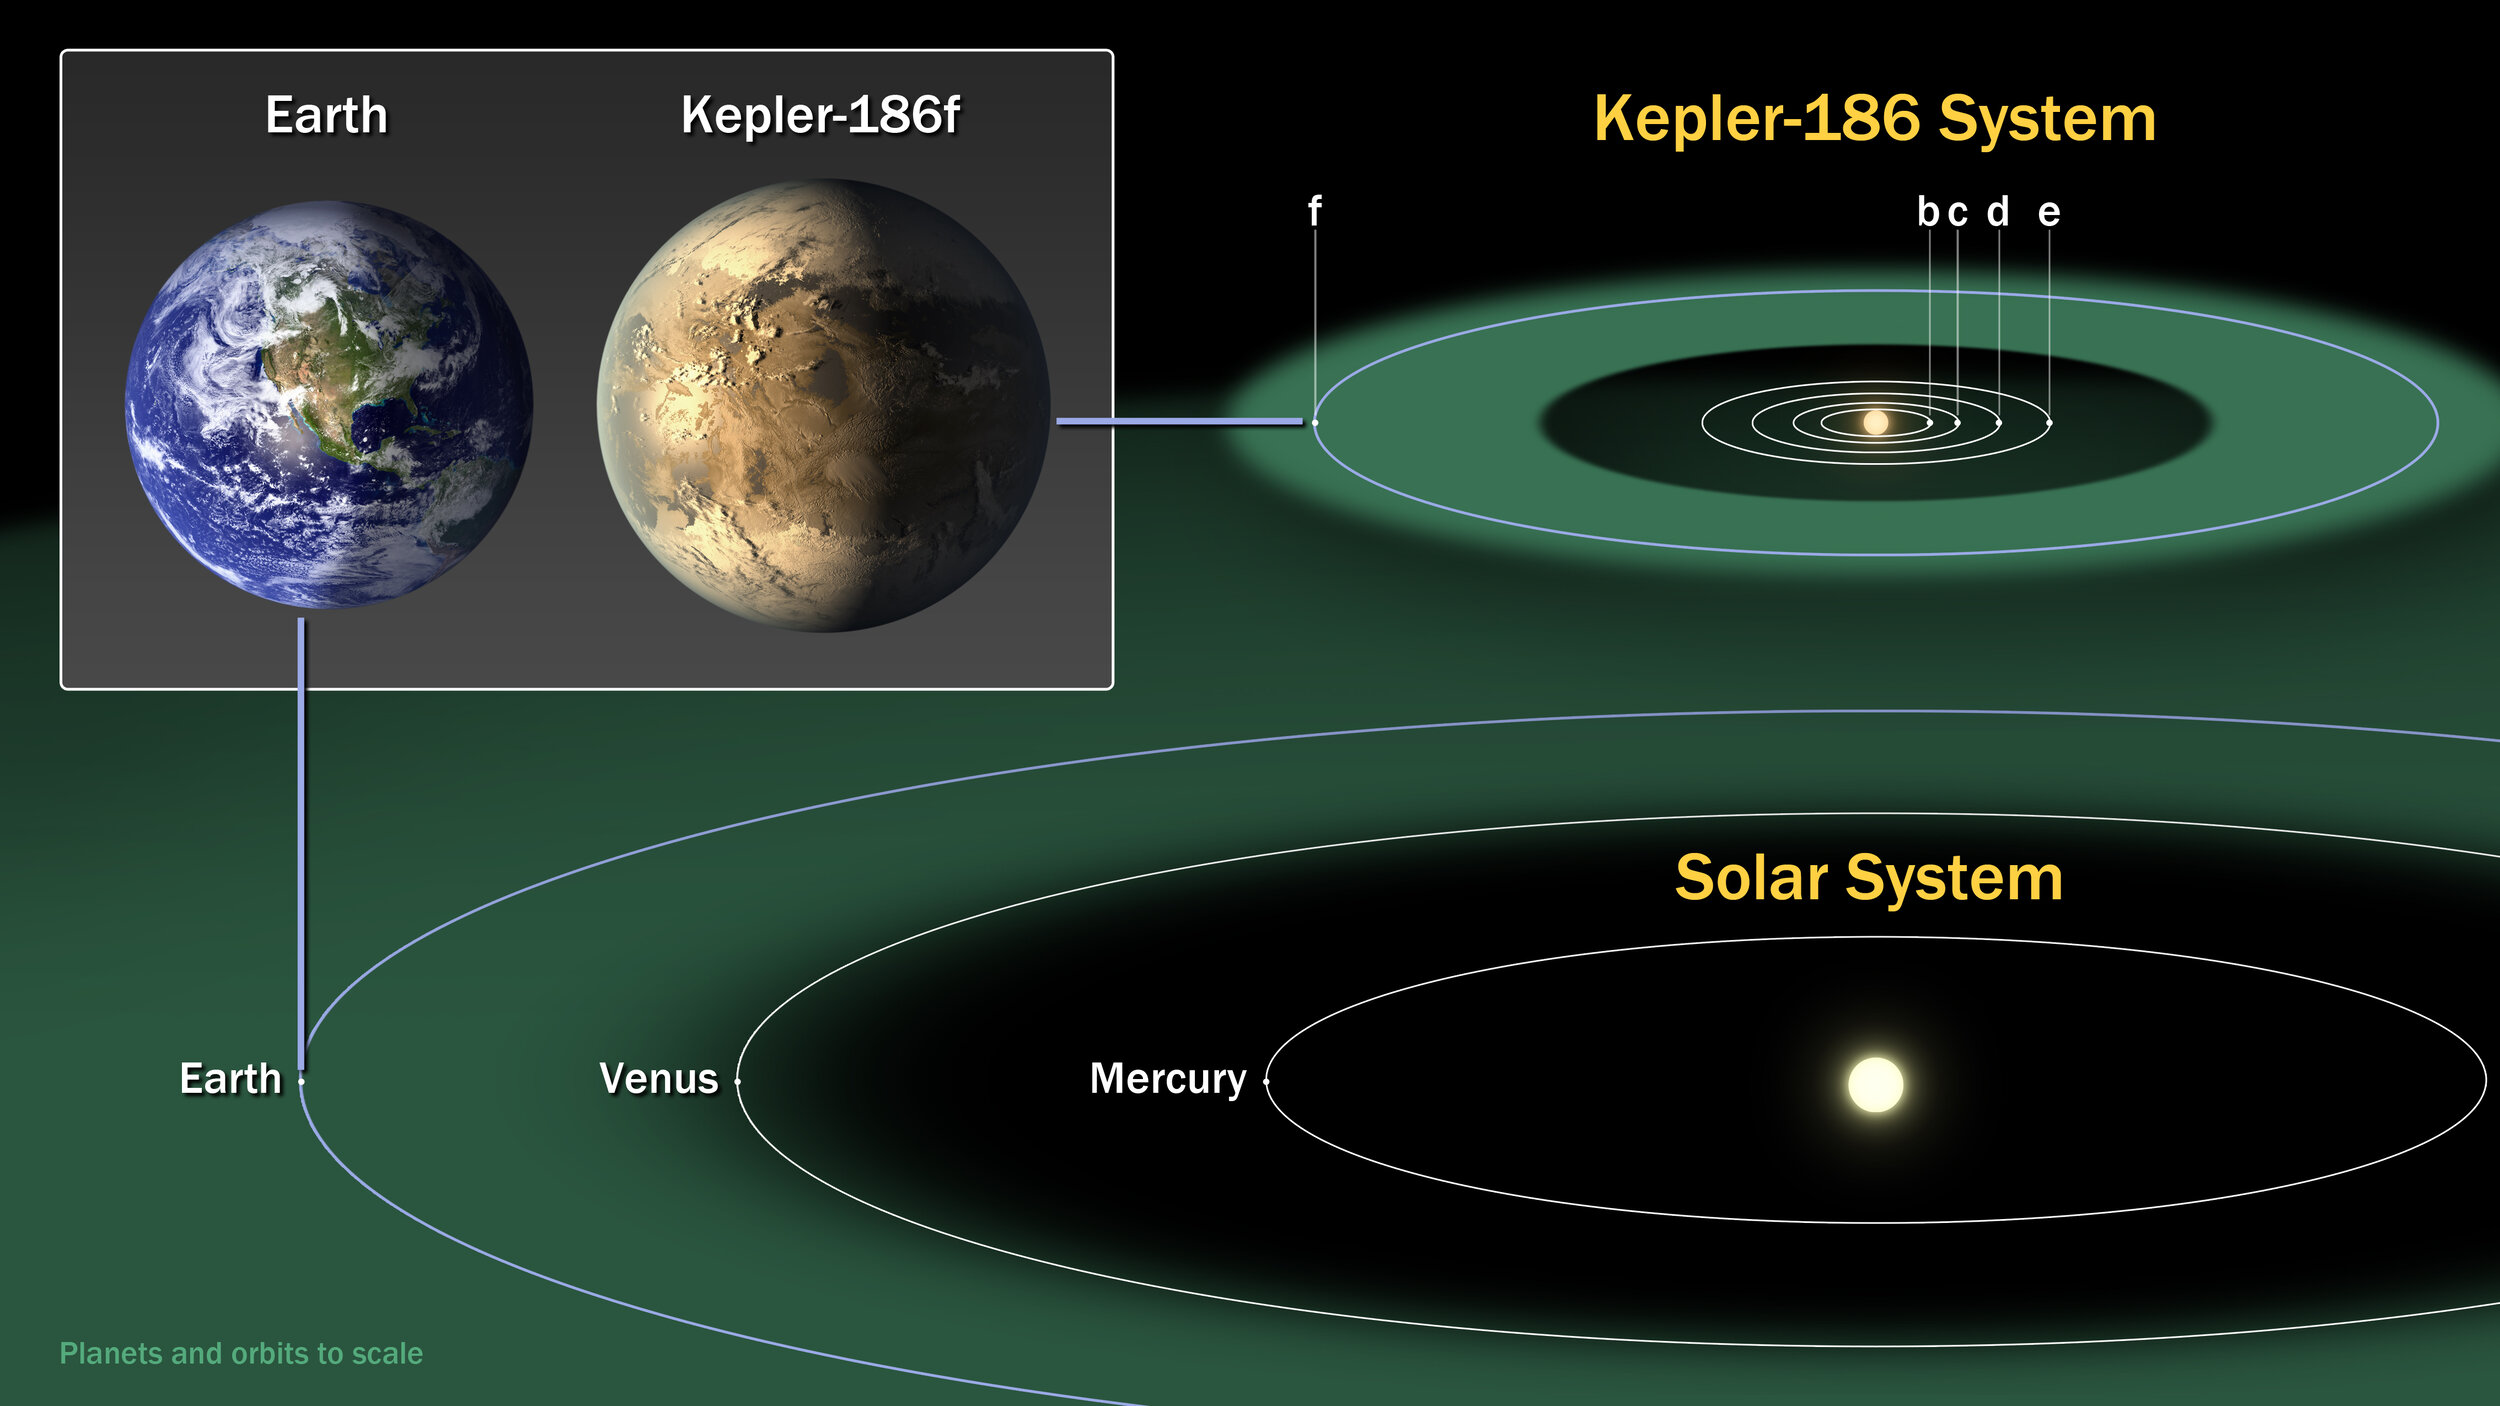 PICTURED: A comparison of the orbit and size of Earth to its solar system, with that of Kepler-i86f, a planet about the size of Earth that’s also in the habitable orbiting zone of its star. PC: NASA/JPL Caltech.